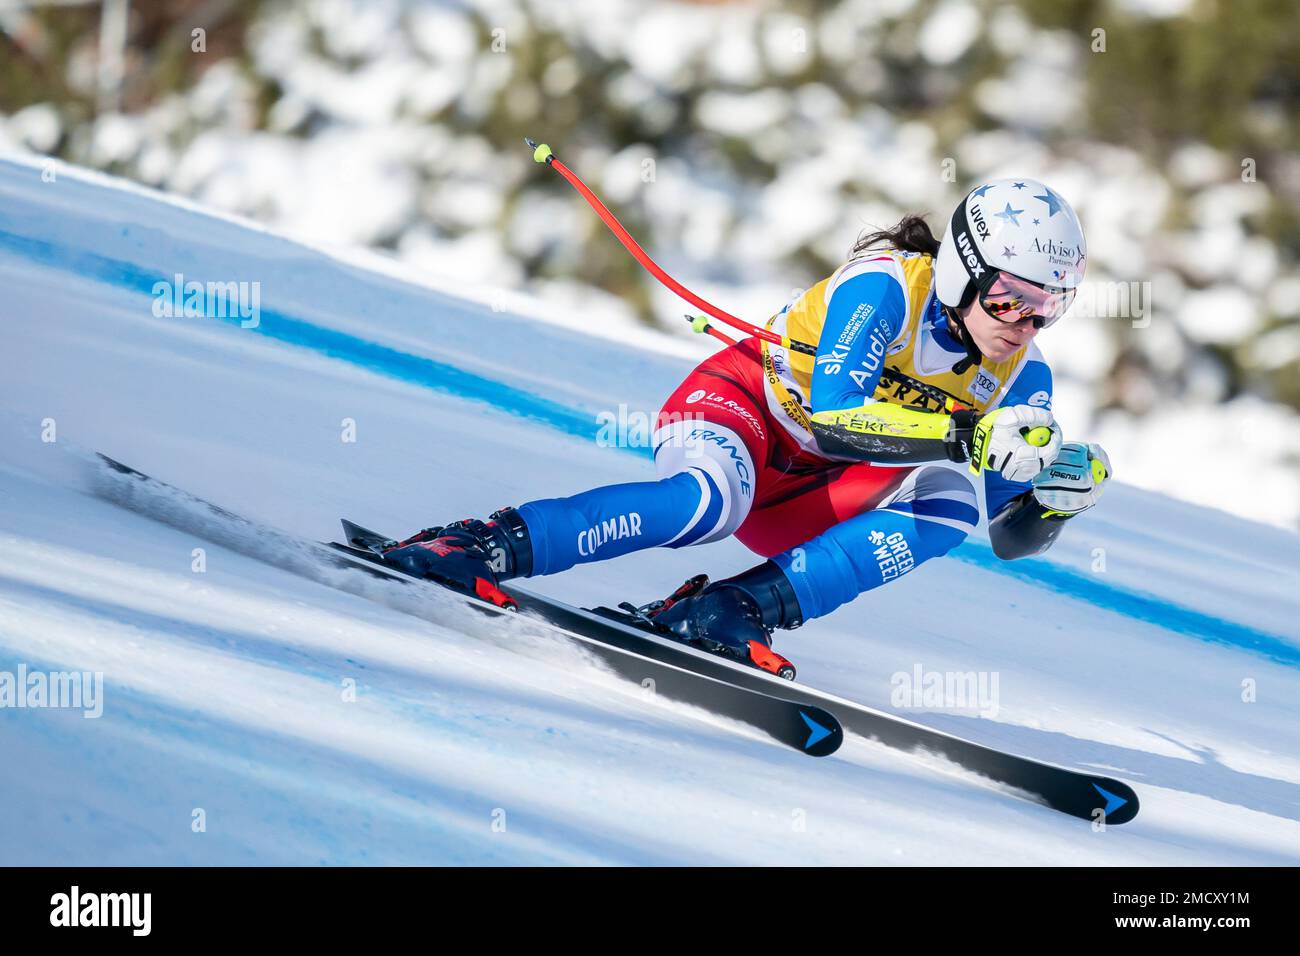 Cortina d'Ampezzo, Italy 22 January 2023. MIRADOLI Romane (Fra) competing  in the Audi Fis Alpine Skiing World Cup Women's Super-G Race on the Olympia  Course in the dolomite mountain range. Credit: MAURO